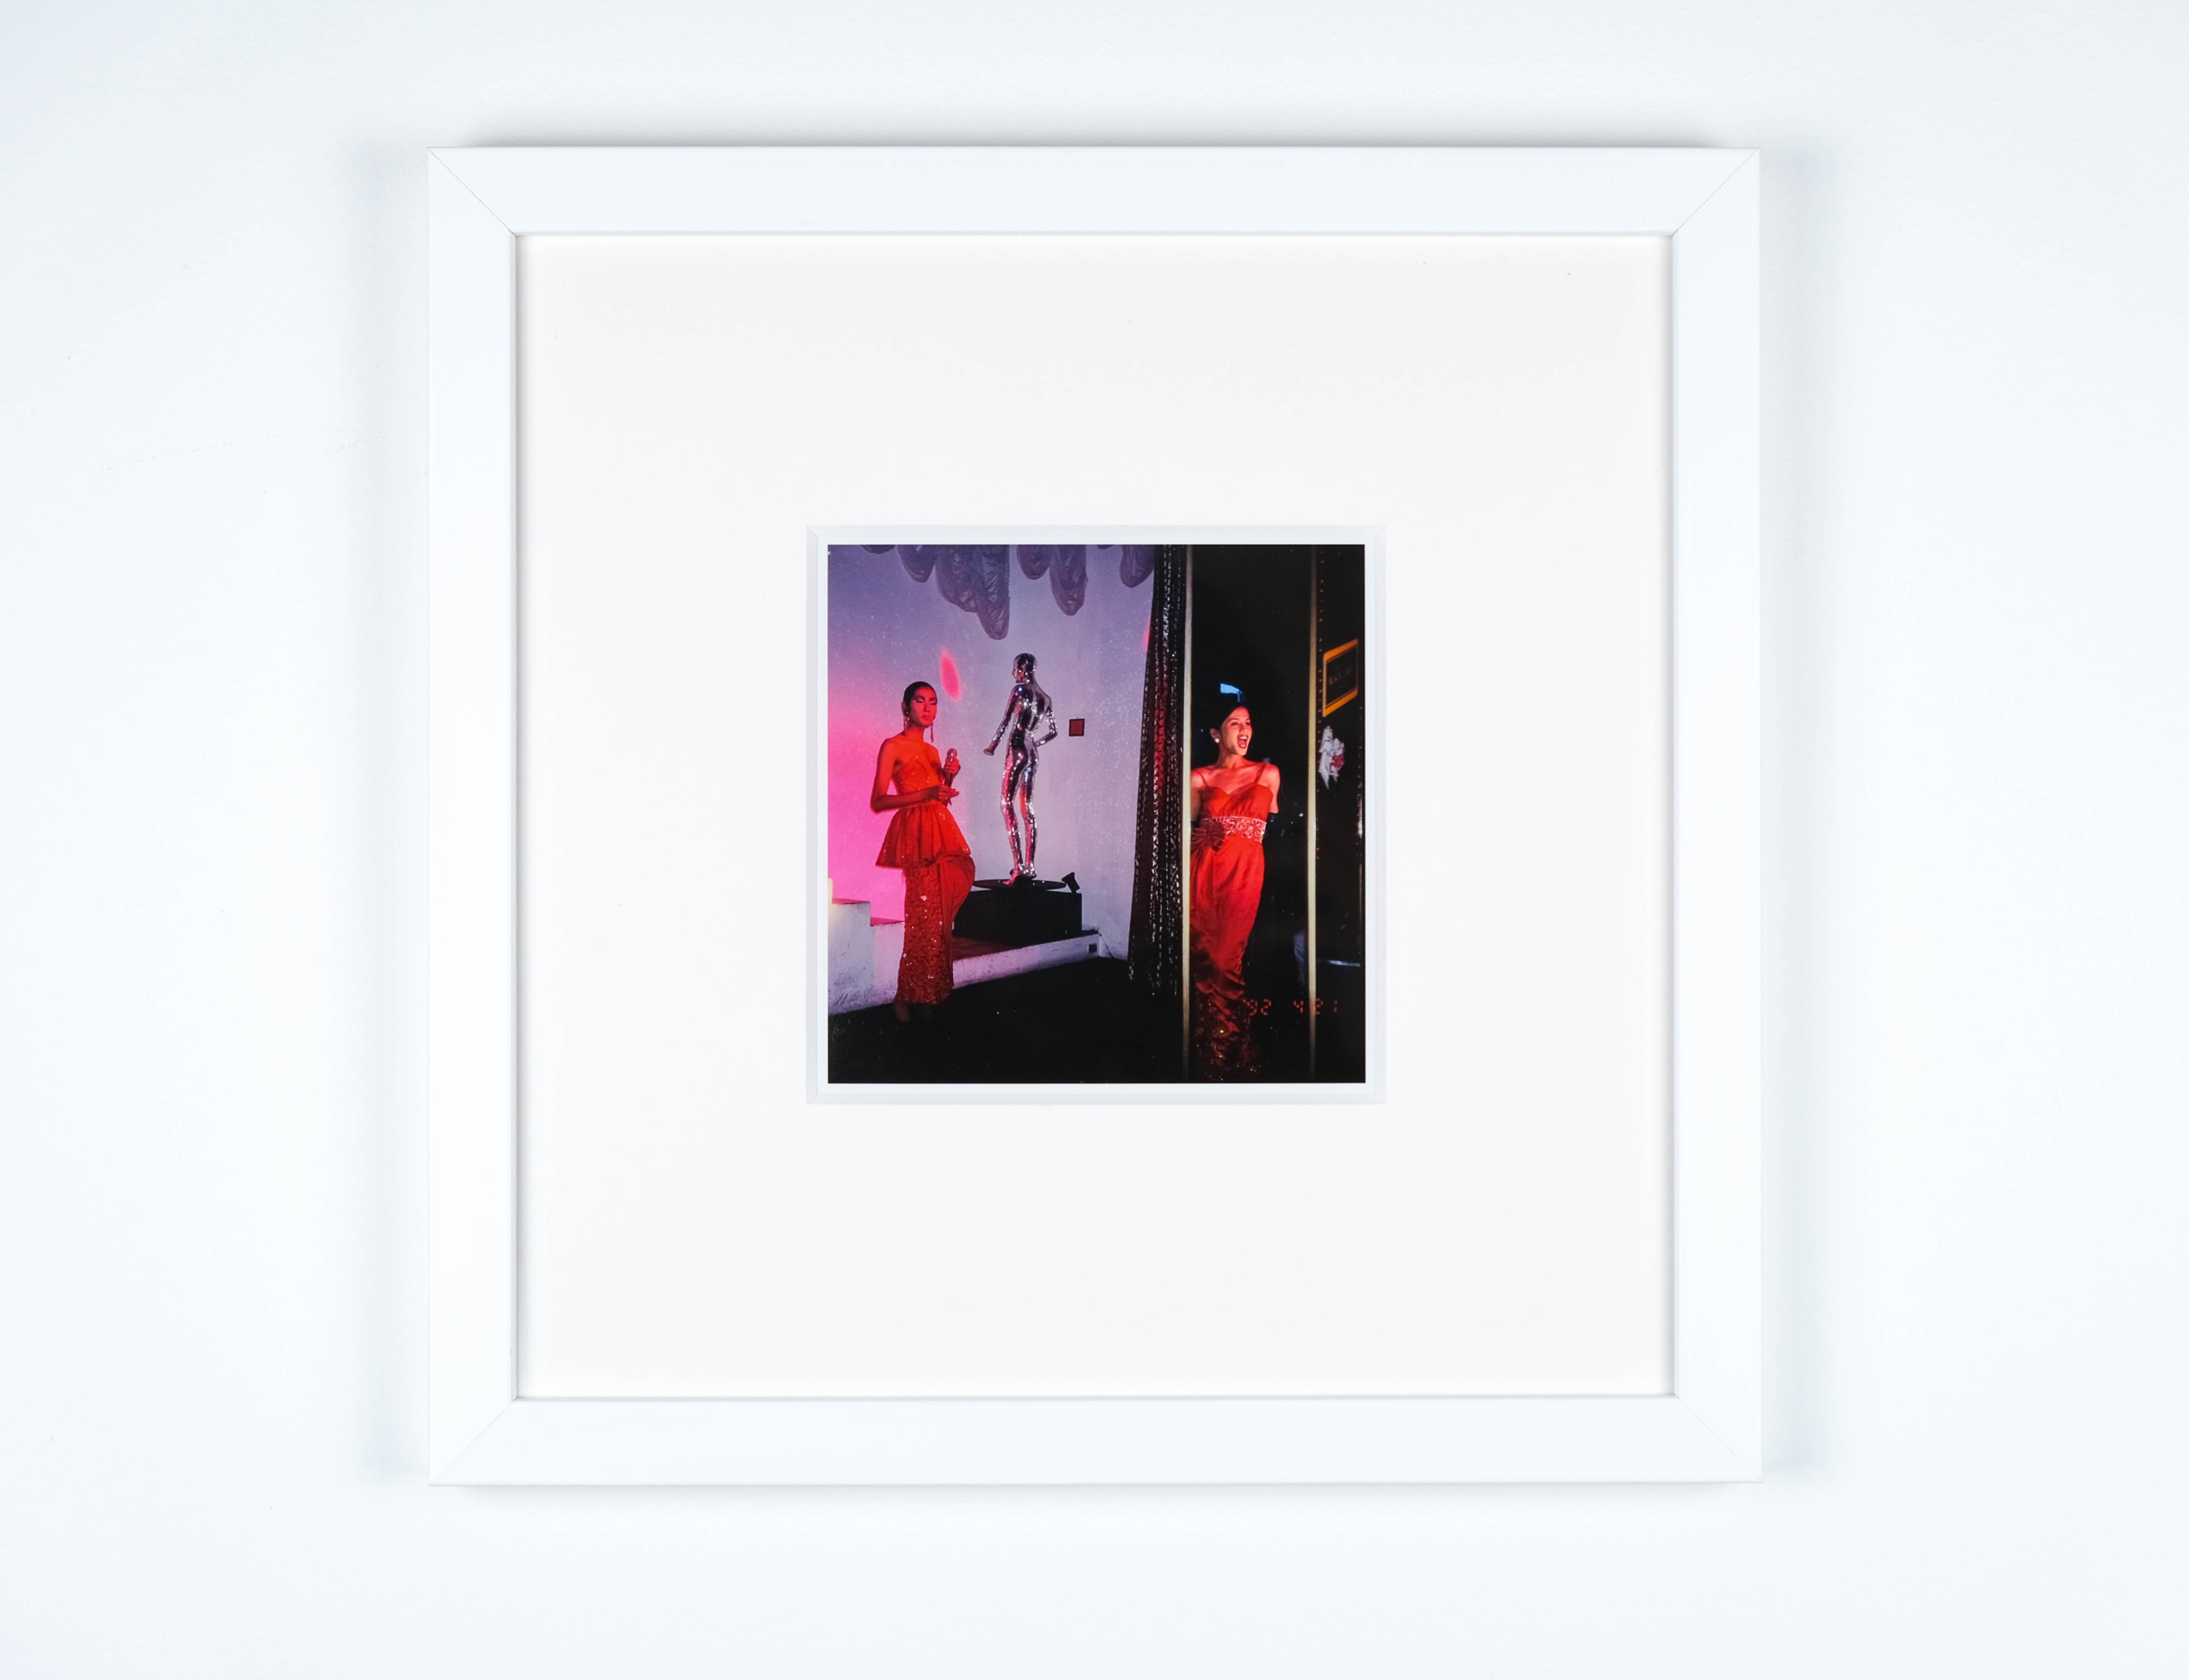 For sale an original limited edition signed museum-quality Magnum/Aperture 6x6 photographic print by renowned American artist NAN GOLDIN.

Titled 